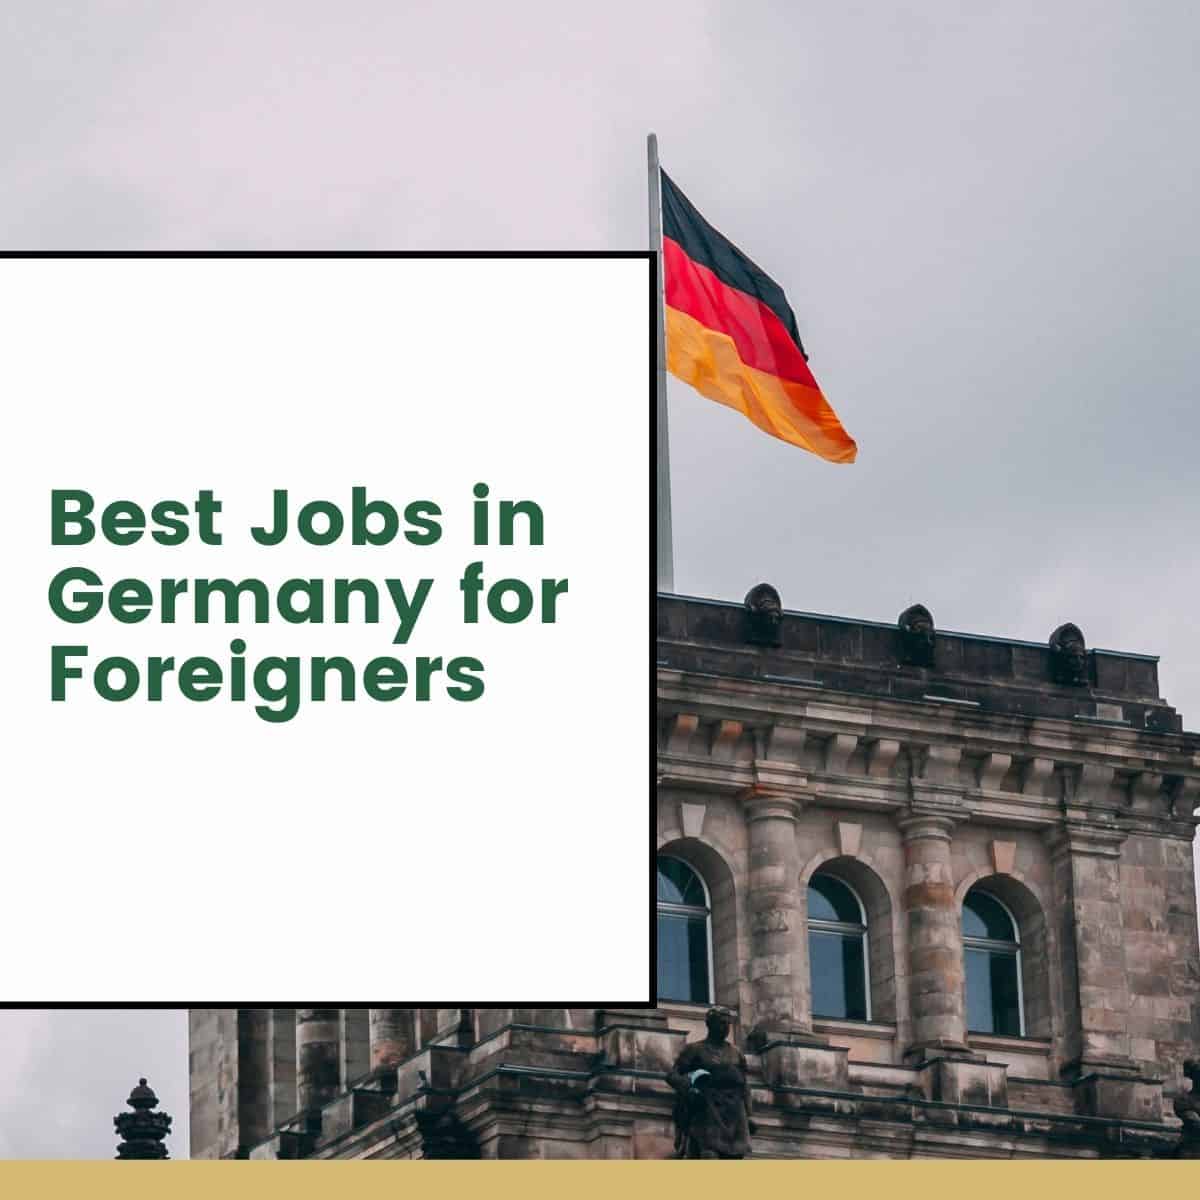 Best Jobs in Germany for Foreigners